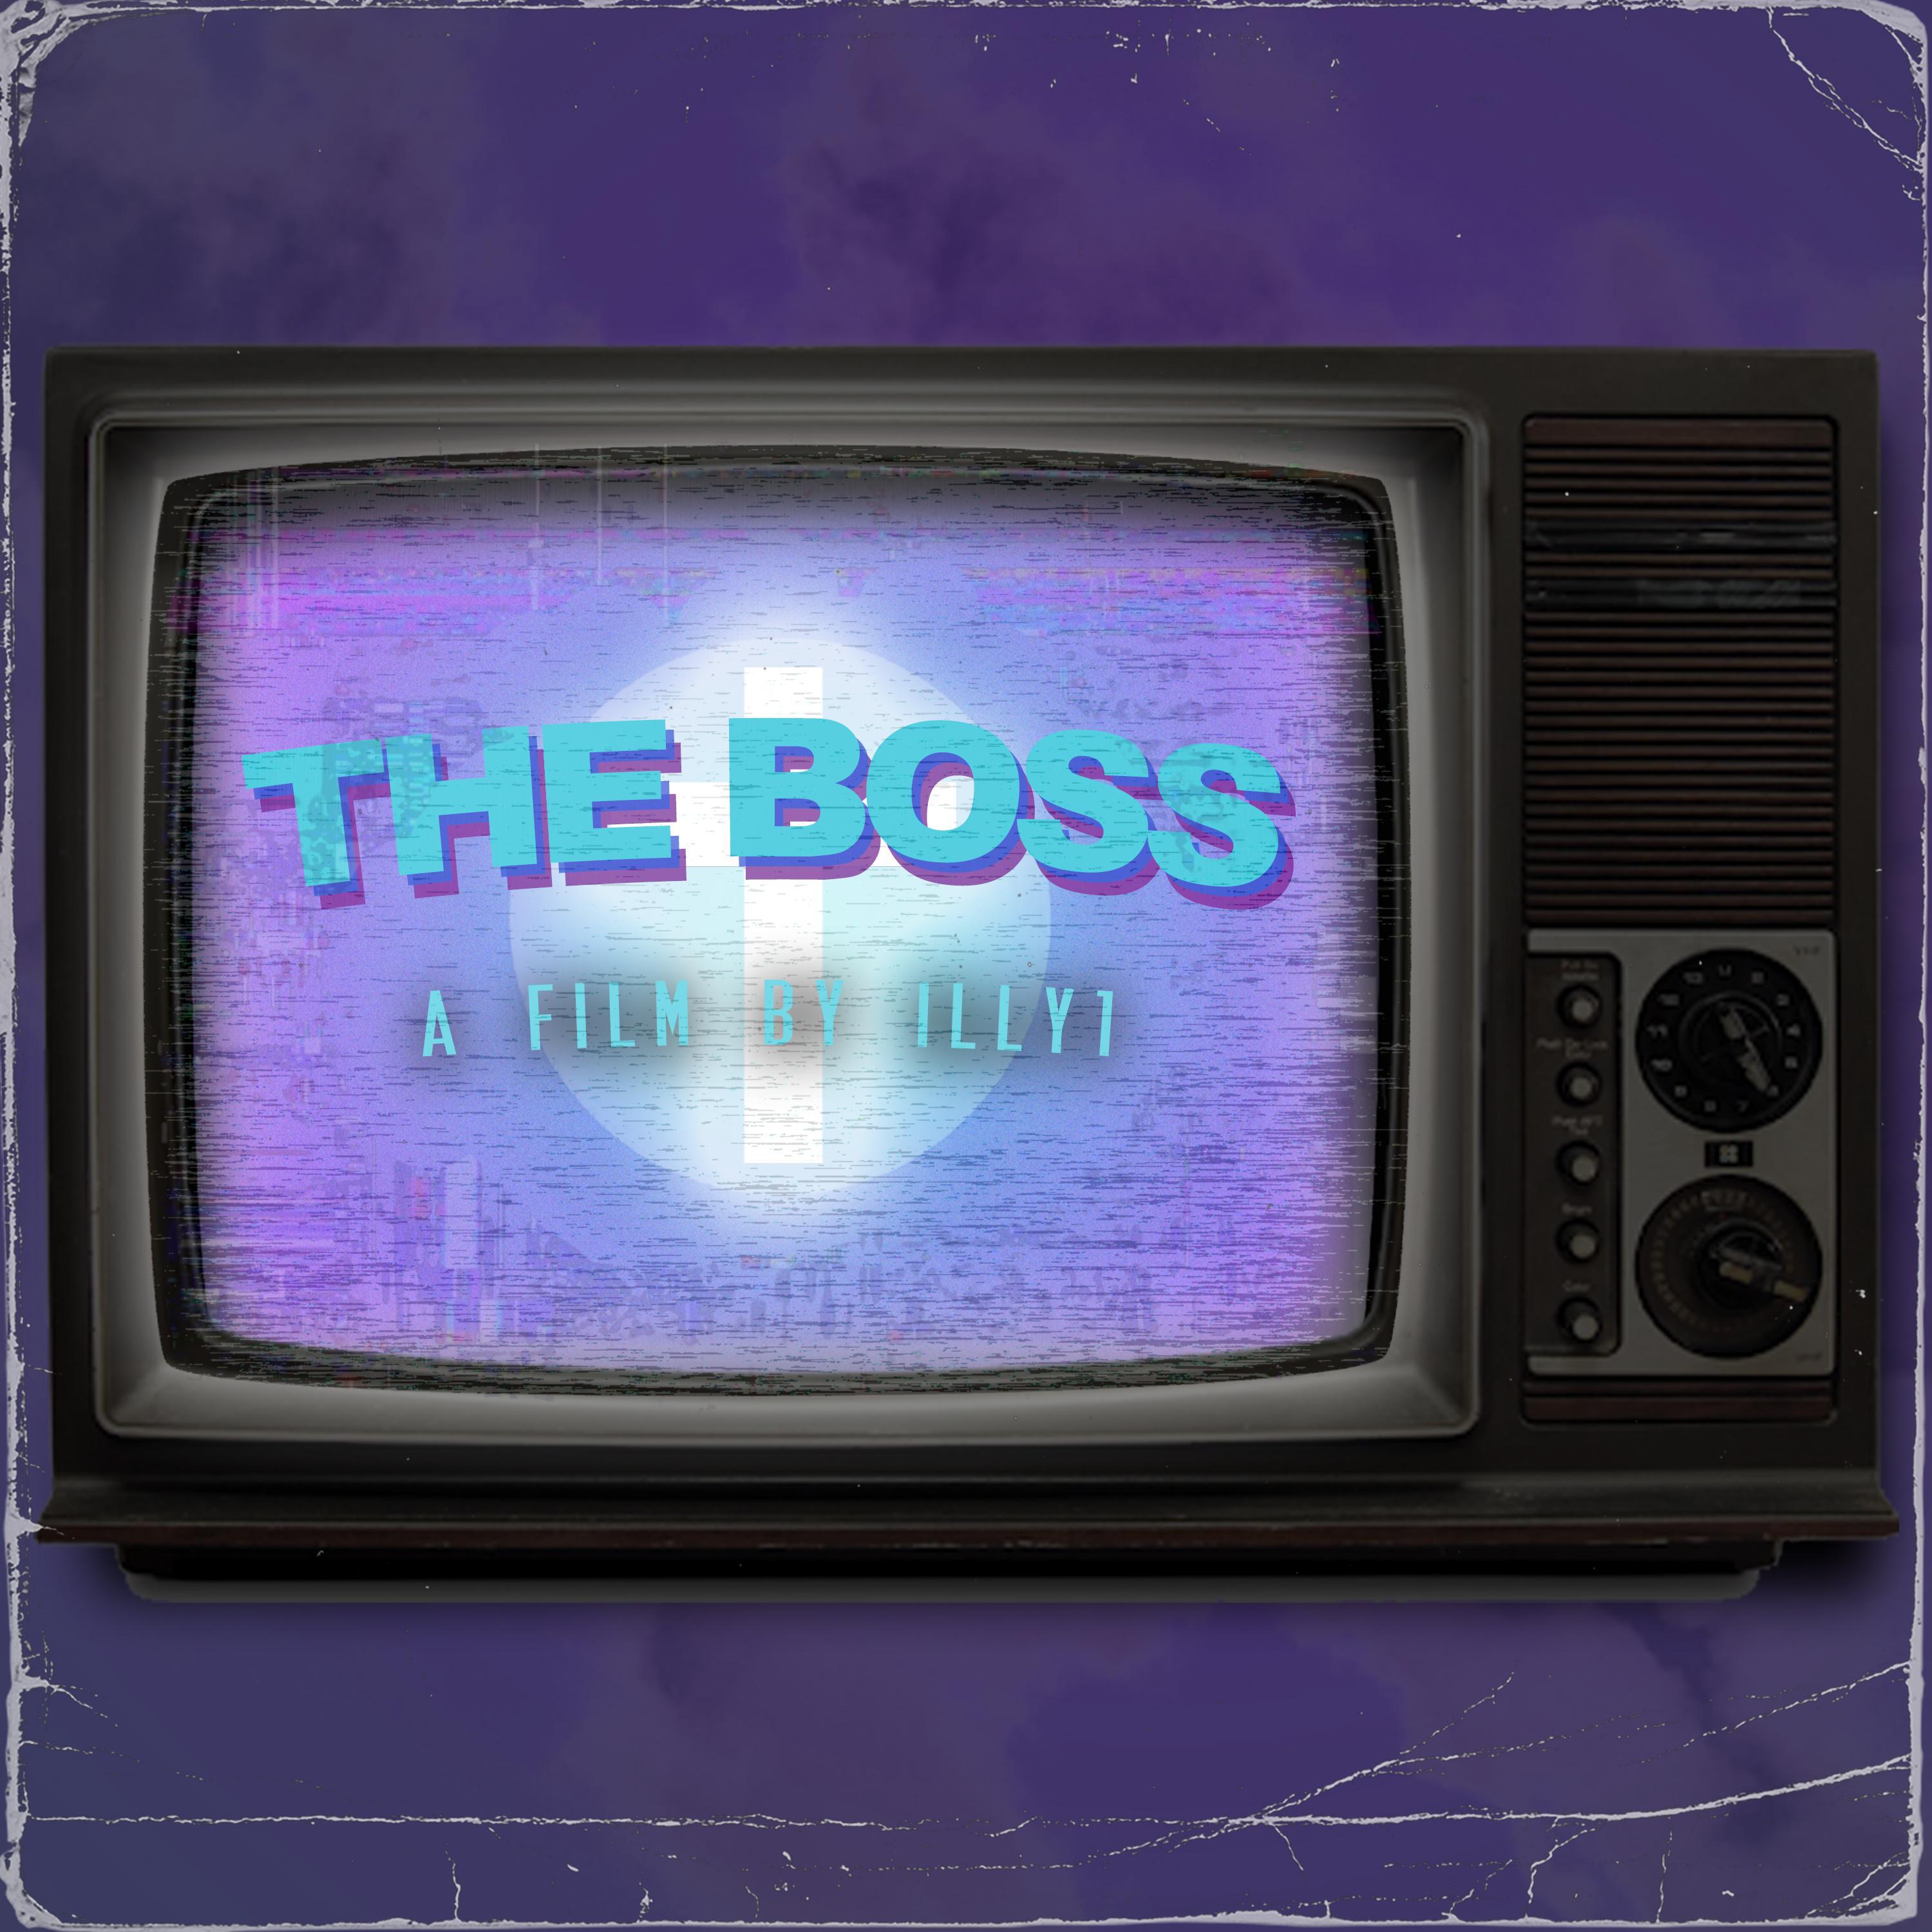 Illy1 - The Boss